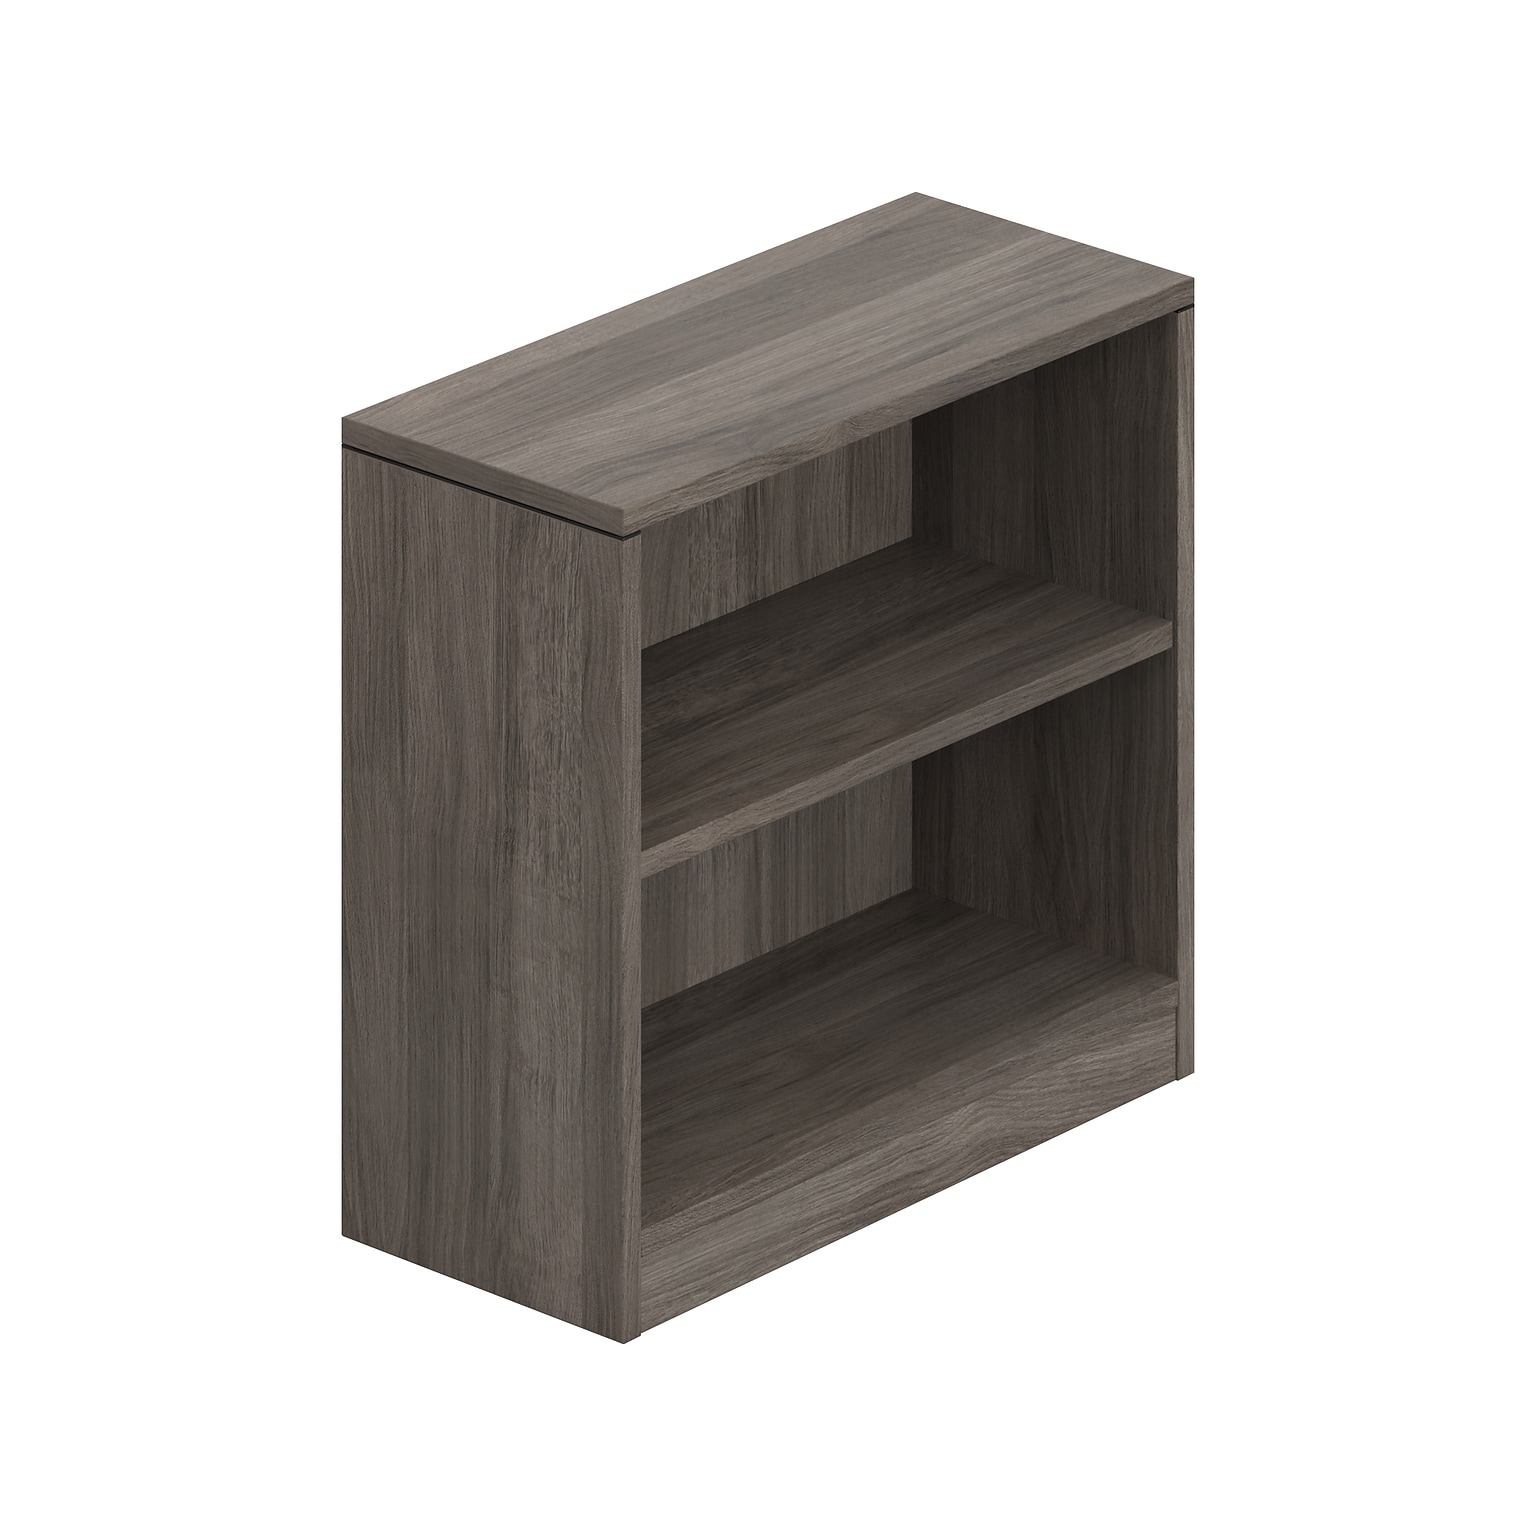 Offices to go 1-Shelf 30H Bookcase, Artisan Gray (TDSL30BCAGL)